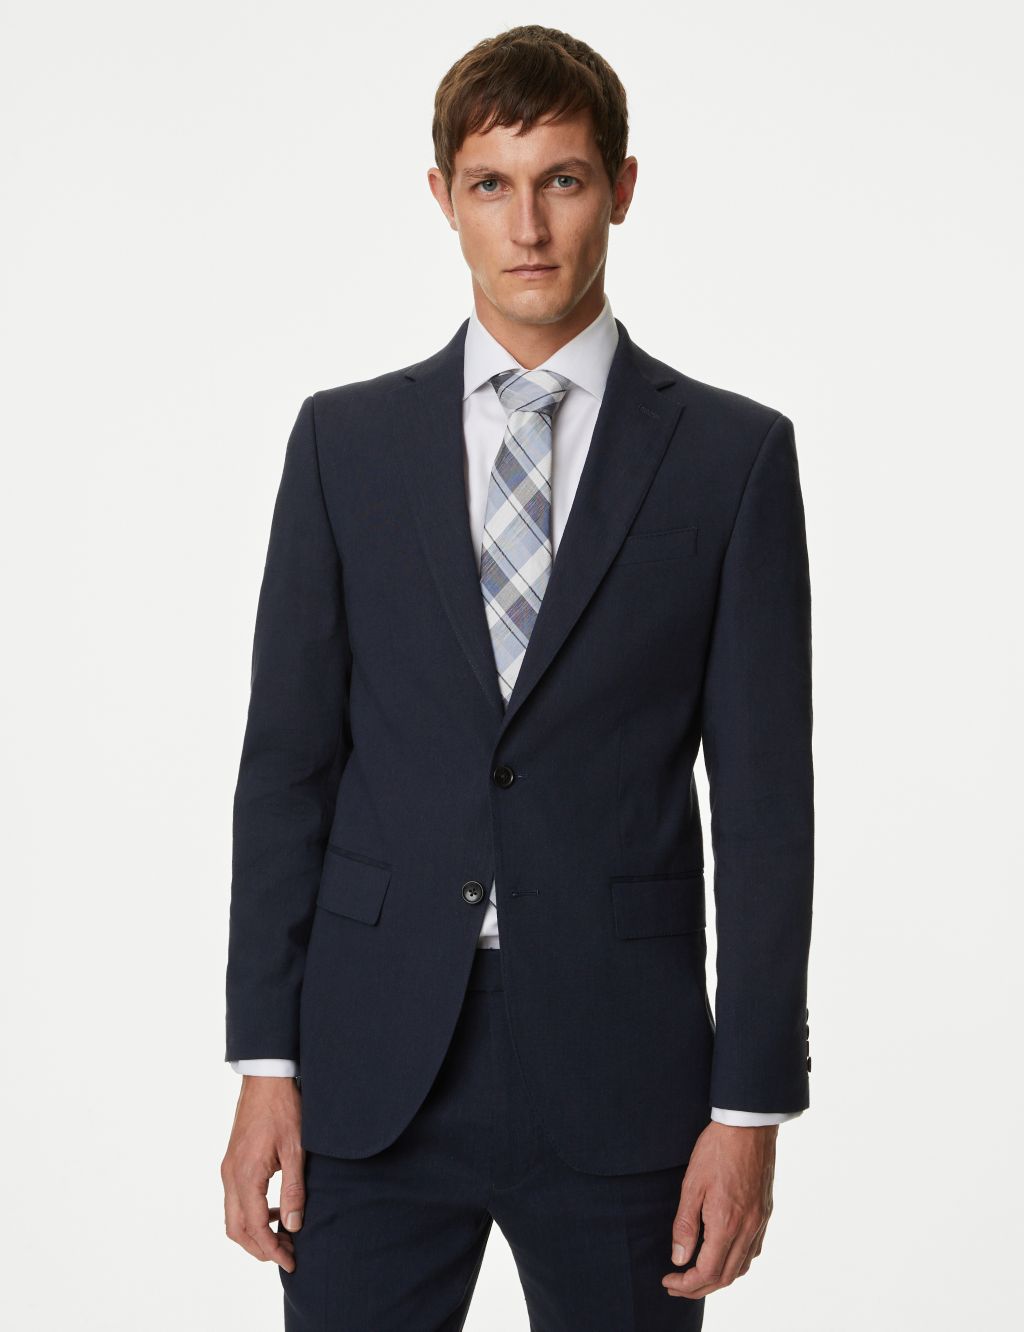 Tailored Fit Italian Linen Miracle™ Suit Jacket image 3